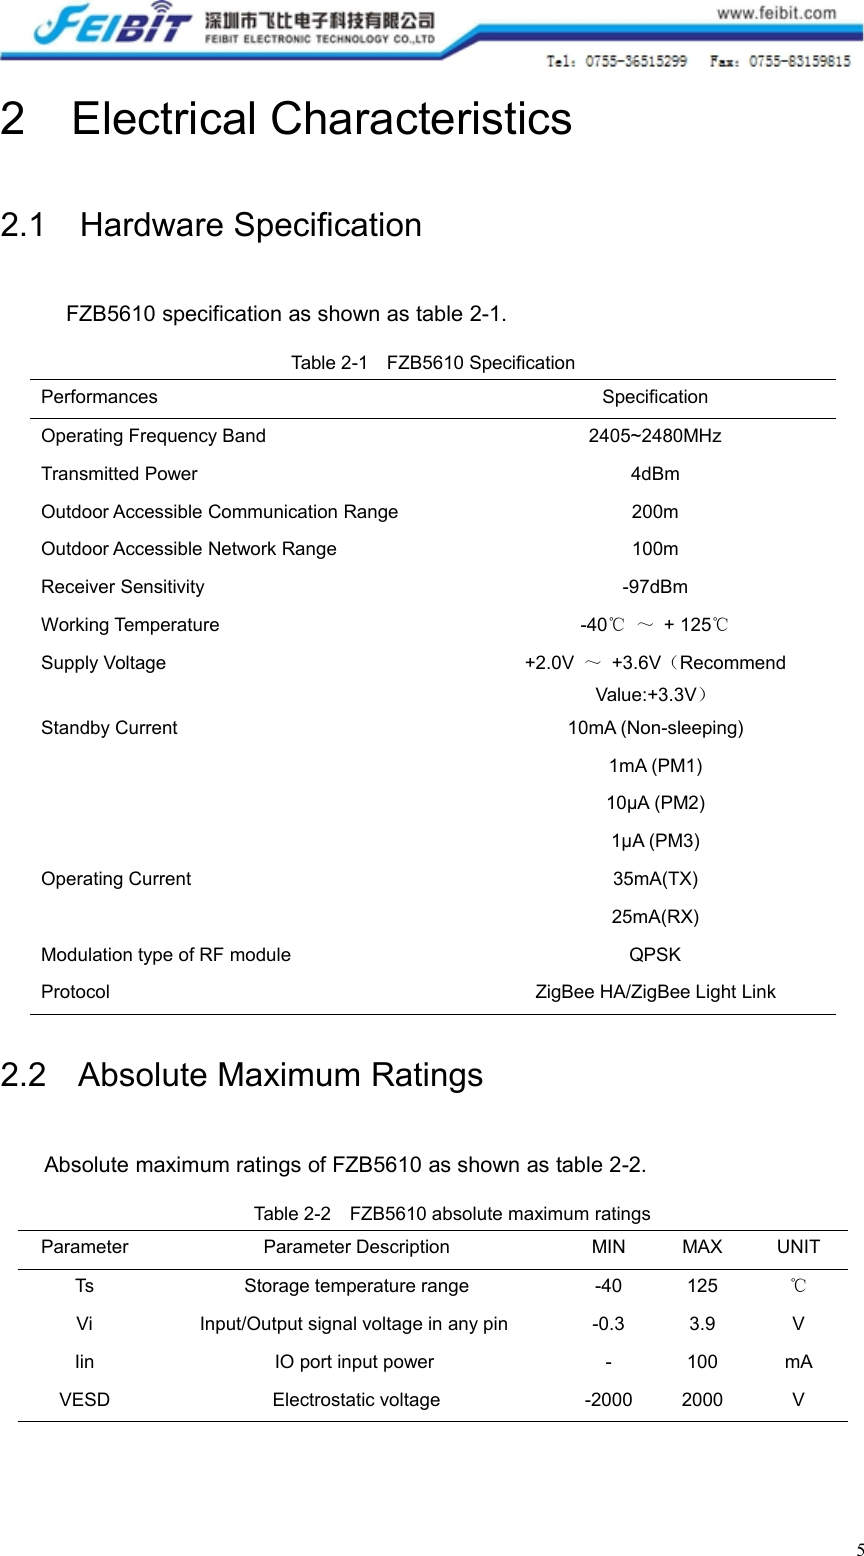 52 Electrical Characteristics2.1 Hardware SpecificationFZB5610 specification as shown as table 2-1.Table 2-1 FZB5610 SpecificationPerformancesSpecificationOperating Frequency Band2405~2480MHzTransmitted Power4dBmOutdoor Accessible Communication Range200mOutdoor Accessible Network Range100mReceiver Sensitivity-97dBmWorking Temperature-40℃ ～ + 125℃Supply Voltage+2.0V ～+3.6V（RecommendValue:+3.3V）Standby Current10mA (Non-sleeping)1mA (PM1)10µA (PM2)1µA (PM3)Operating Current35mA(TX)25mA(RX)Modulation type of RF moduleQPSKProtocolZigBee HA/ZigBee Light Link2.2 Absolute Maximum RatingsAbsolute maximum ratings of FZB5610 as shown as table 2-2.Table 2-2 FZB5610 absolute maximum ratingsParameterParameter DescriptionMINMAXUNITTsStorage temperature range-40125℃ViInput/Output signal voltage in any pin-0.33.9VIinIO port input power-100mAVESDElectrostatic voltage-20002000V